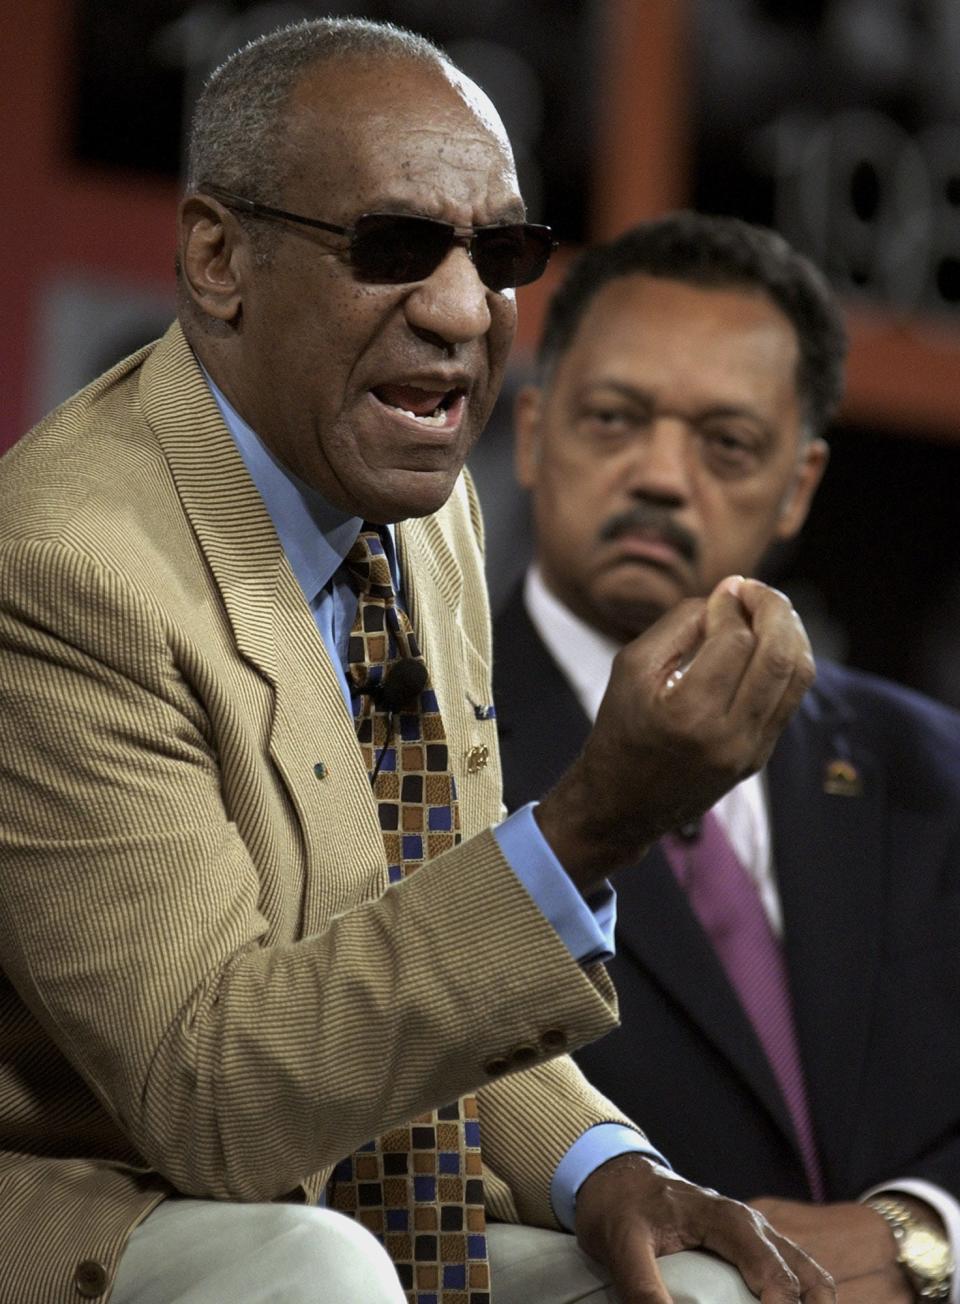 In this 2004 file photo, Bill Cosby and Jesse Jackson attend an annual conference for civil rights organization Rainbow Push Coalition.